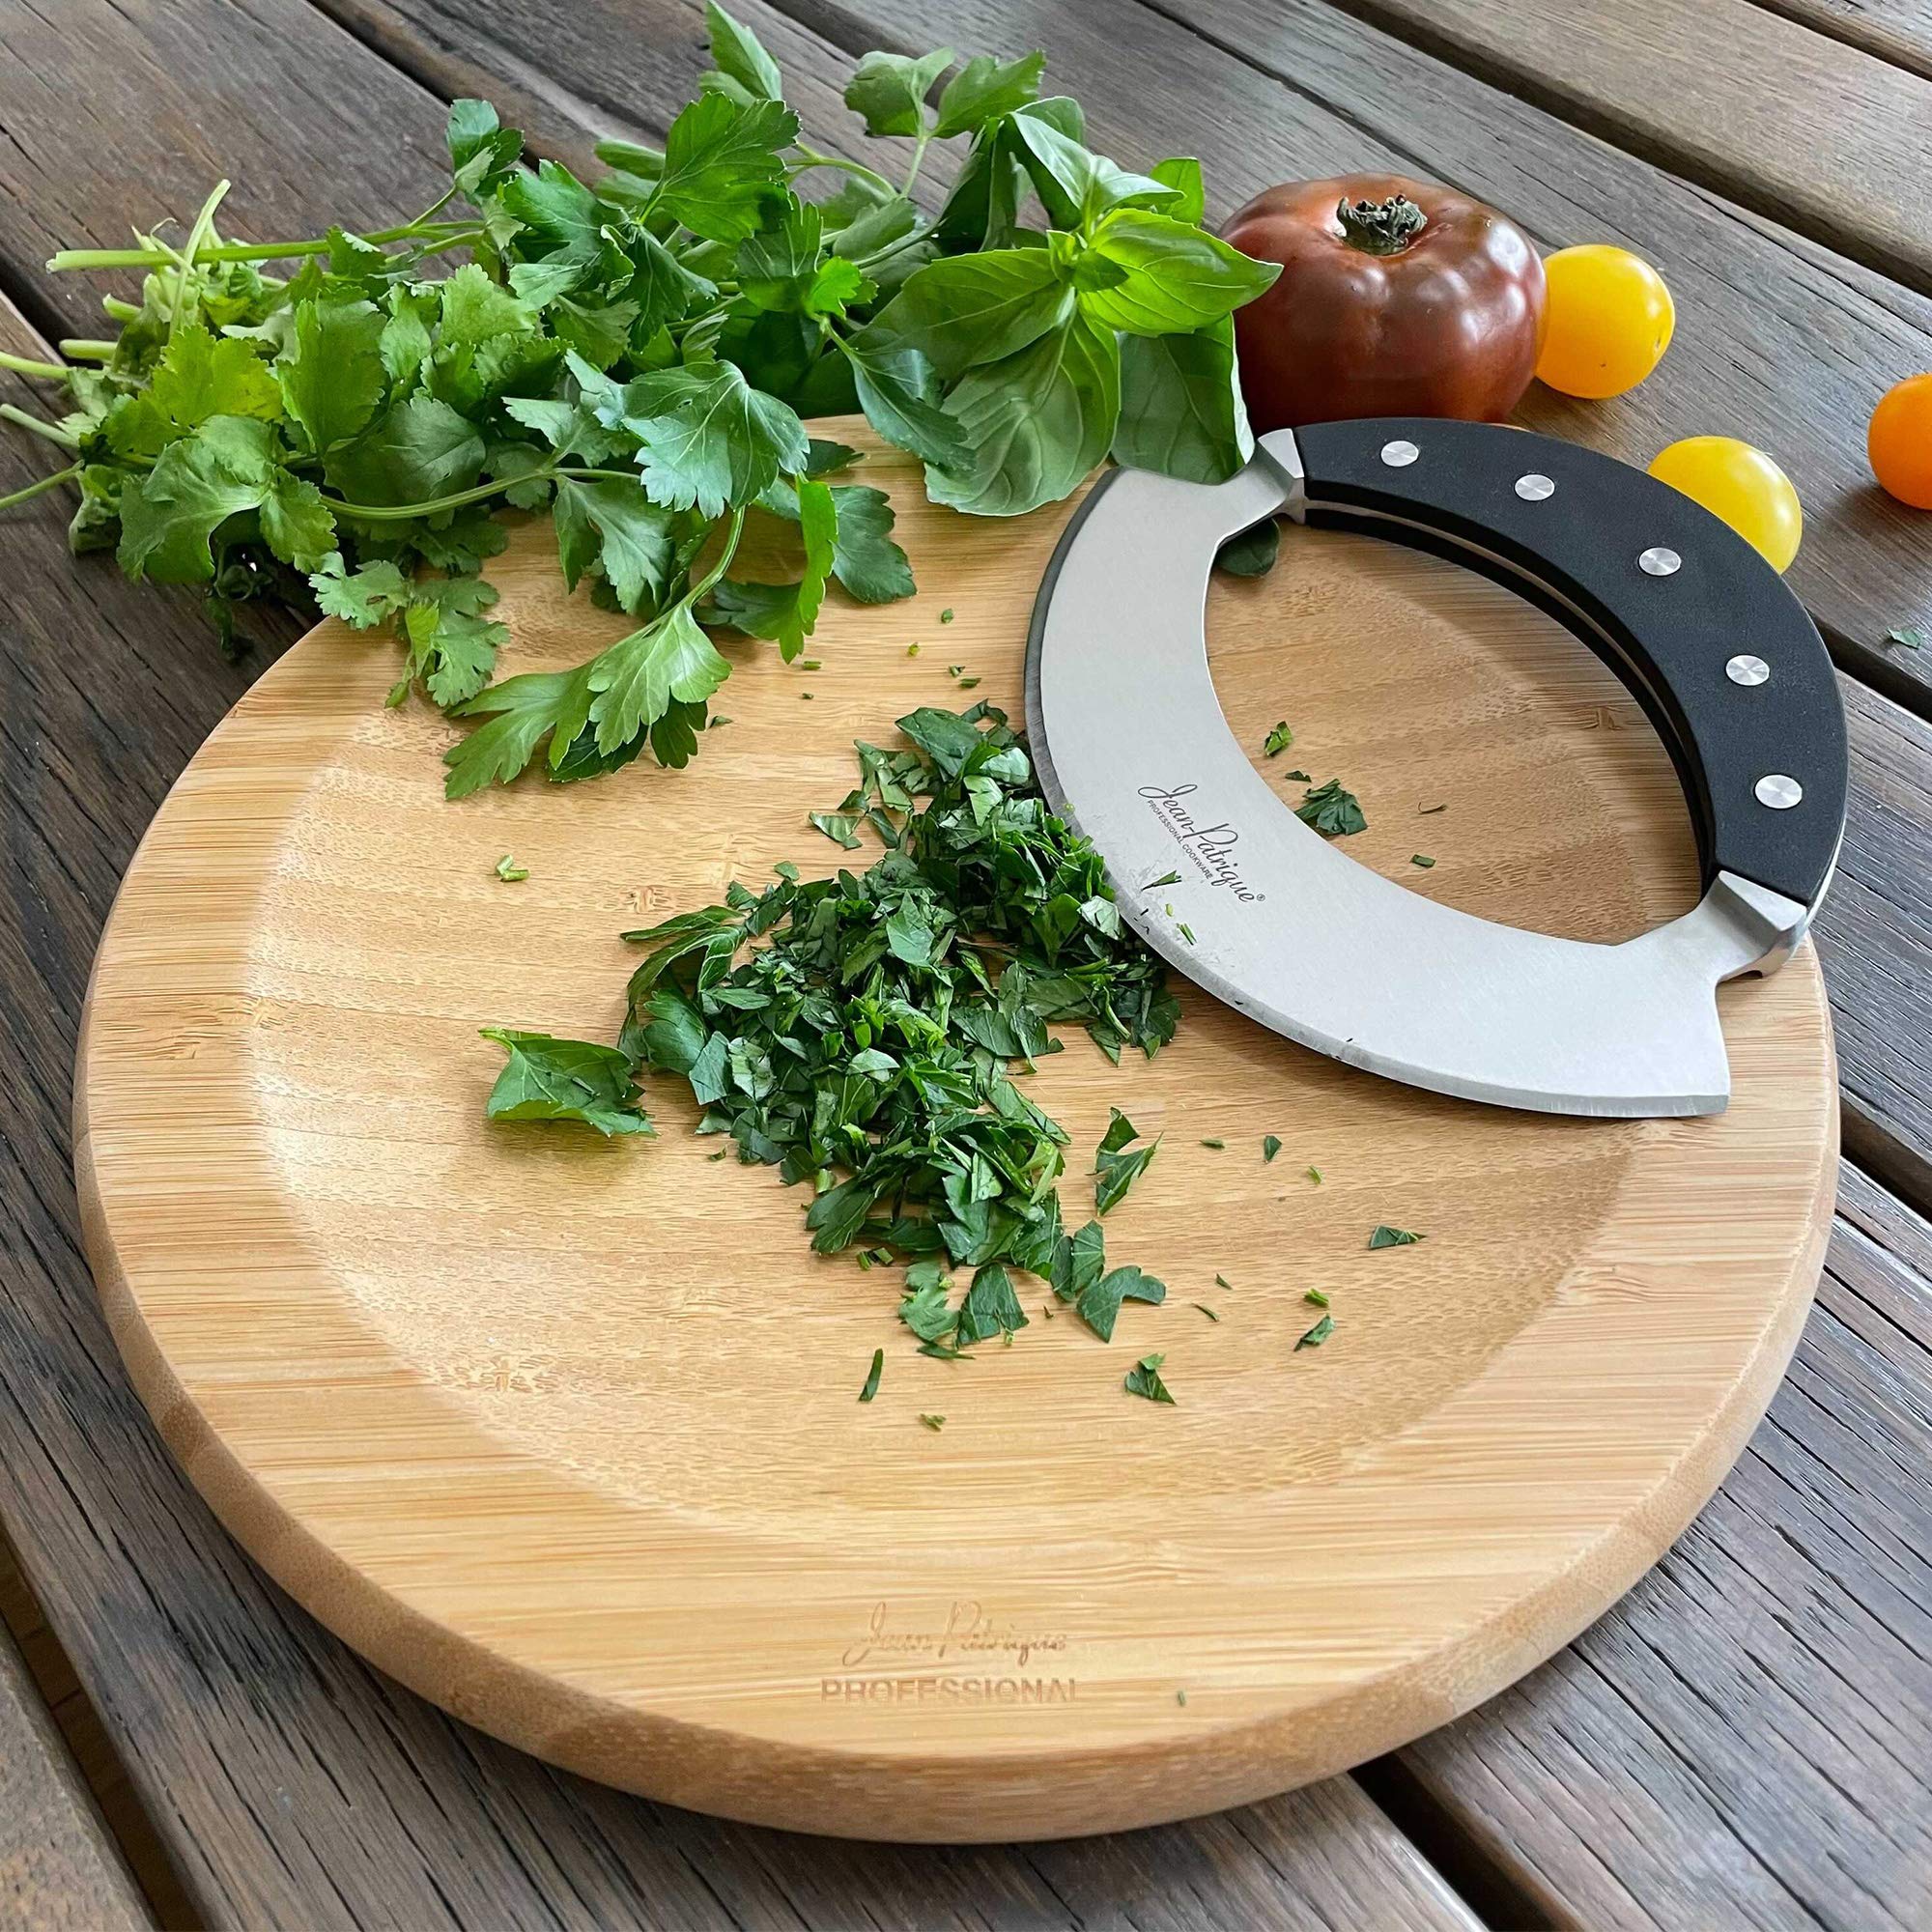 Mezzaluna Knife with Board - Salad Chopper/Pizza Cutter Rocker, Single-Handled with a Stainless Steel Blade - by Jean Patrique